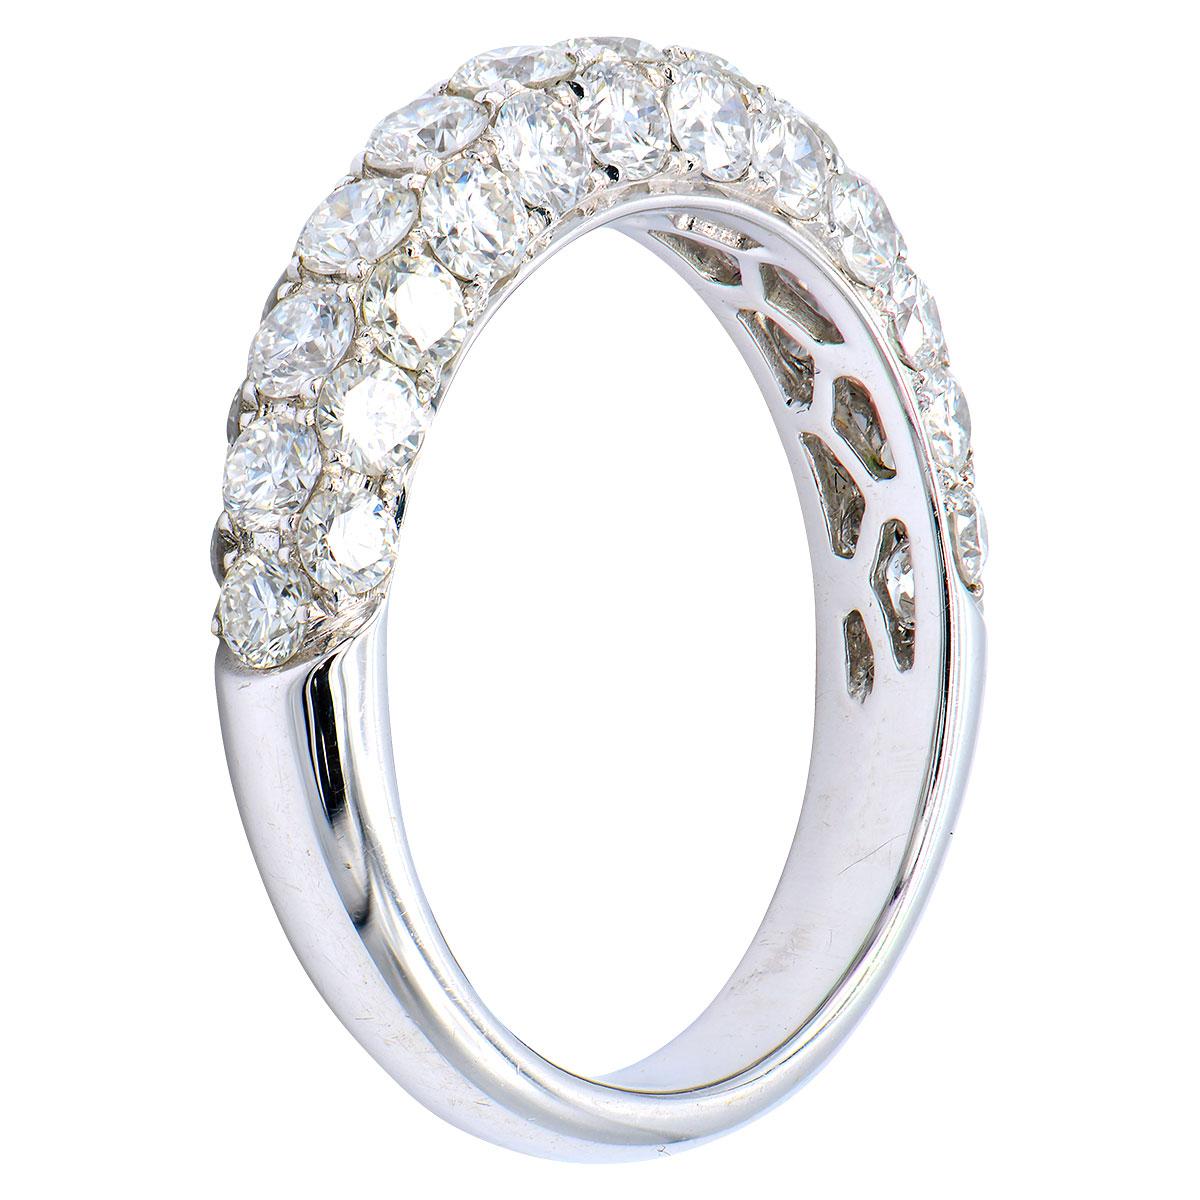 This beautiful band gives sparkle from every angle with diamonds down the center of the band as well as the top and bottom. There are 37 round VS2, G color diamonds totaling 1.80 carats that go halfway around the band. The diamonds are set in 4